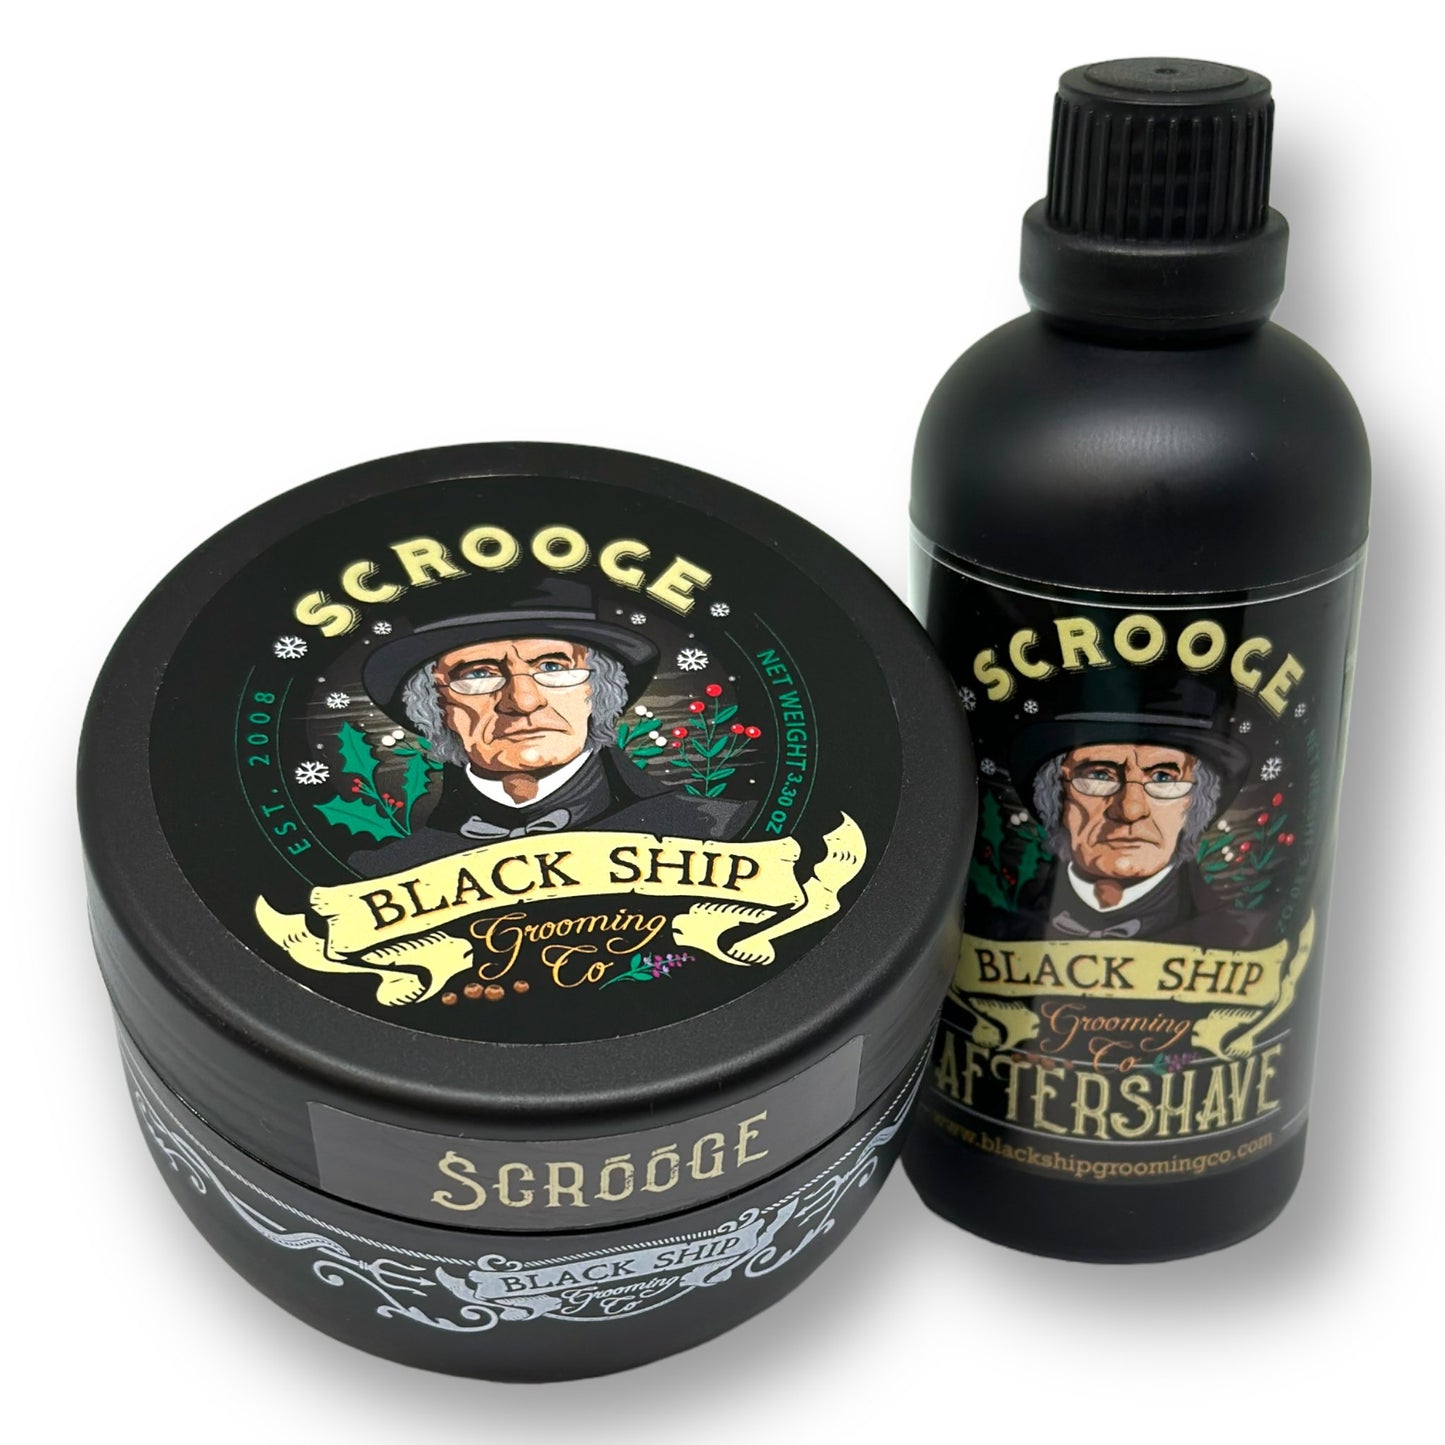 Load image into Gallery viewer, Scrooge shaving soap-Mens shaving Soap- Handmade Soaps - Black Ship Grooming Co.
